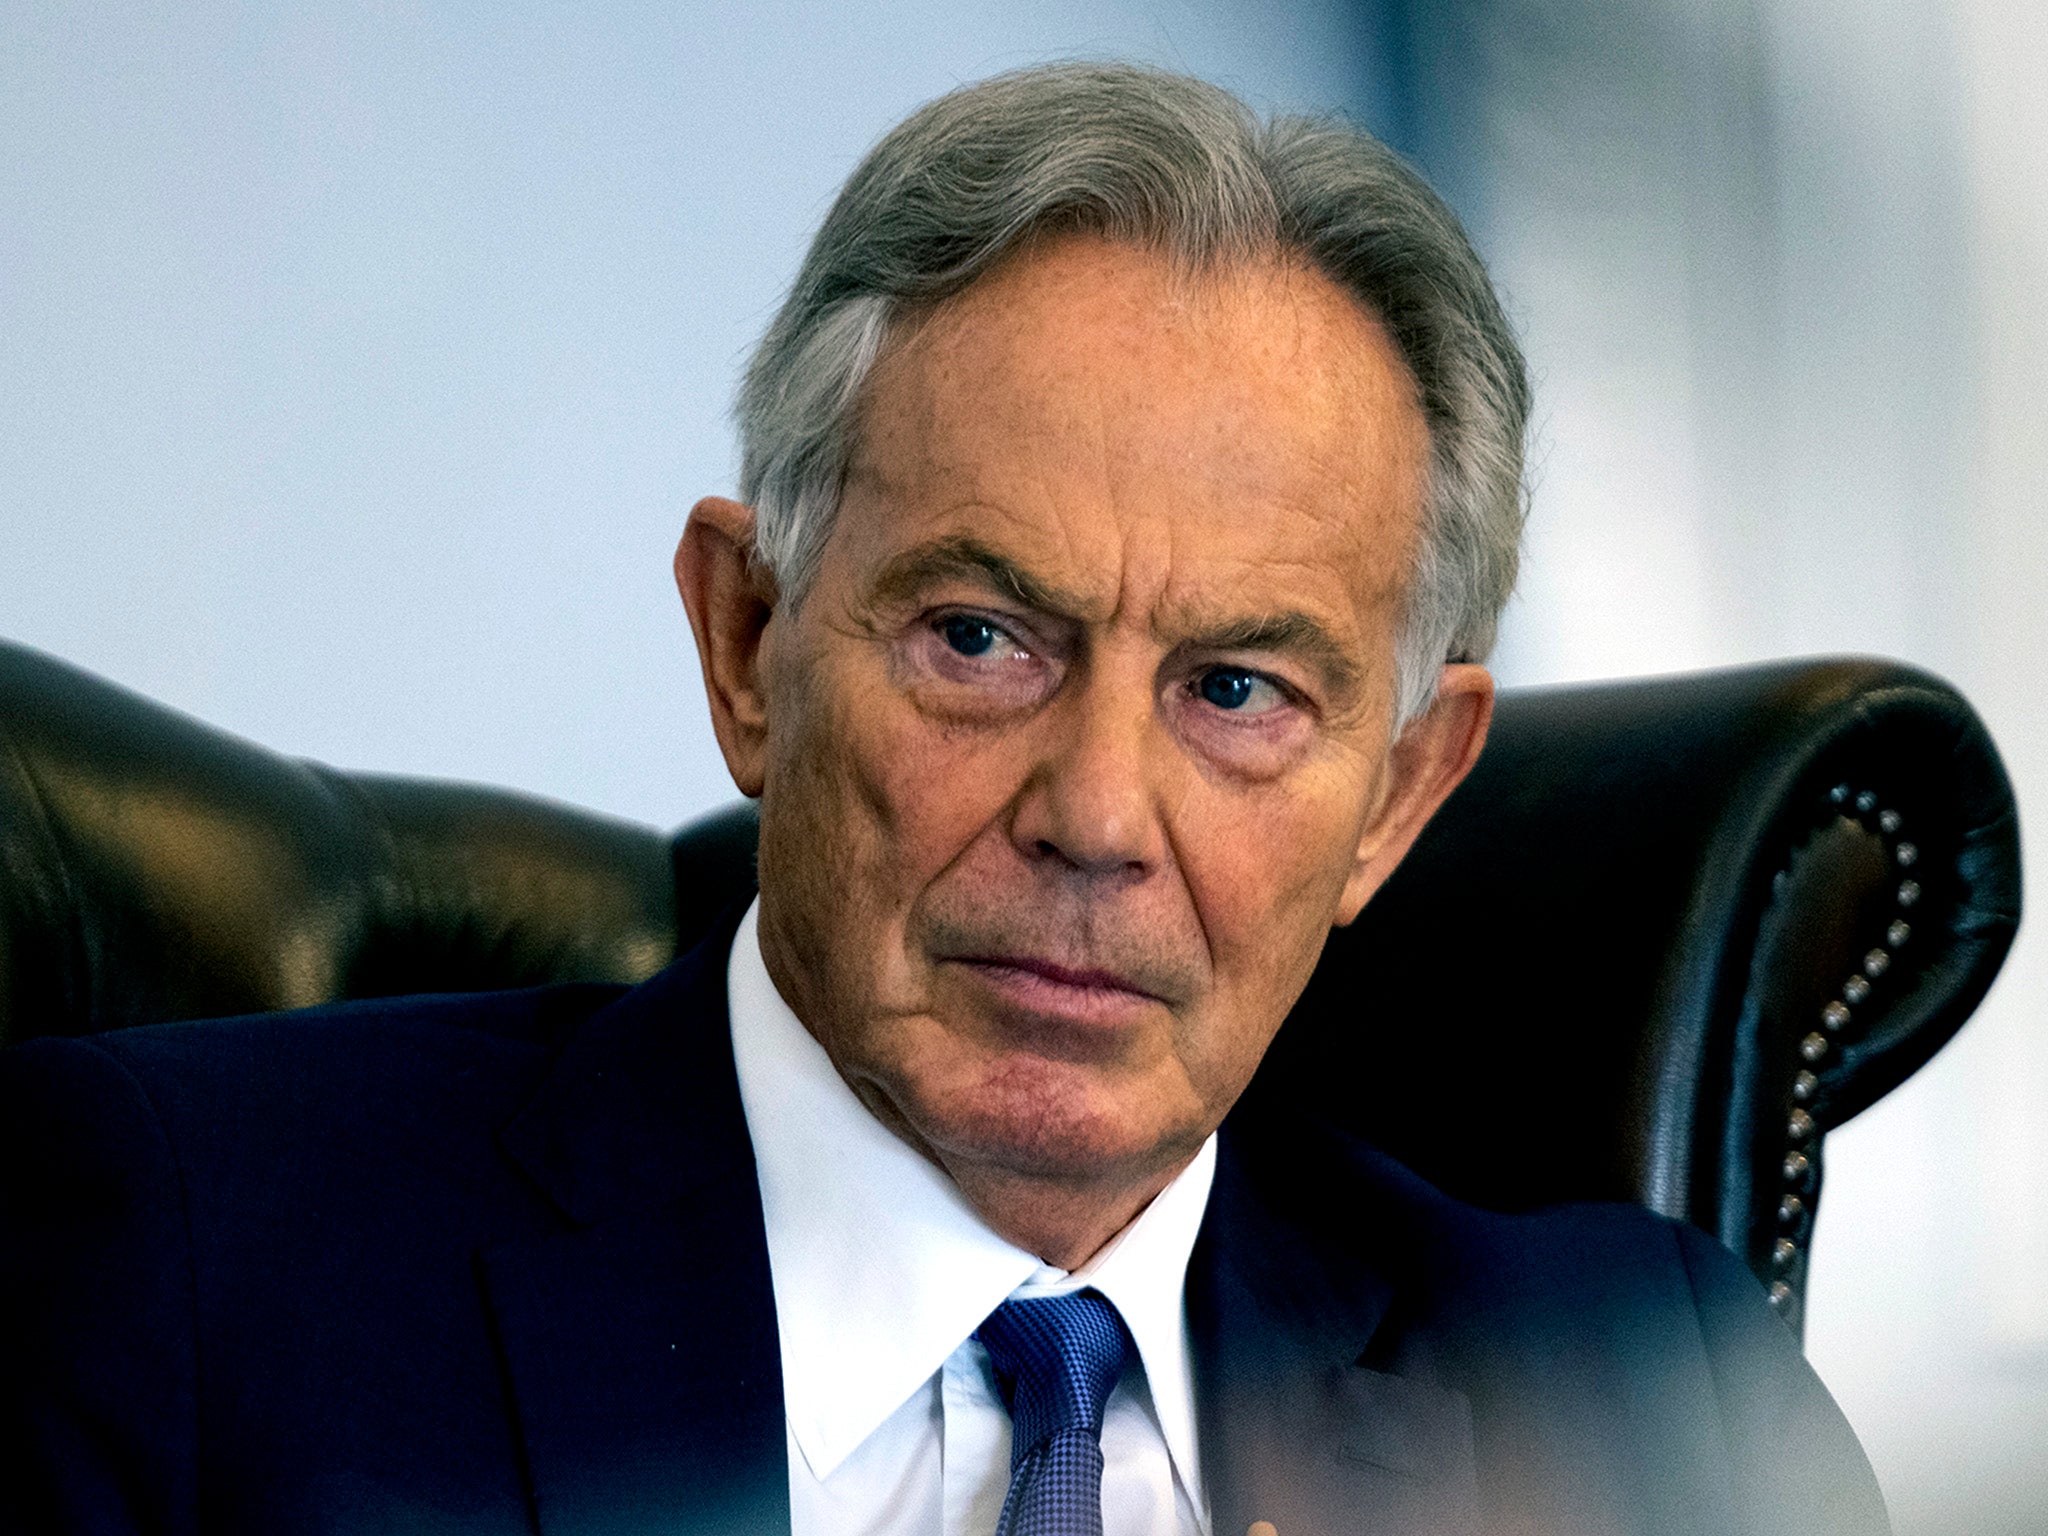 Tony Blair has been named in the Pandora Papers